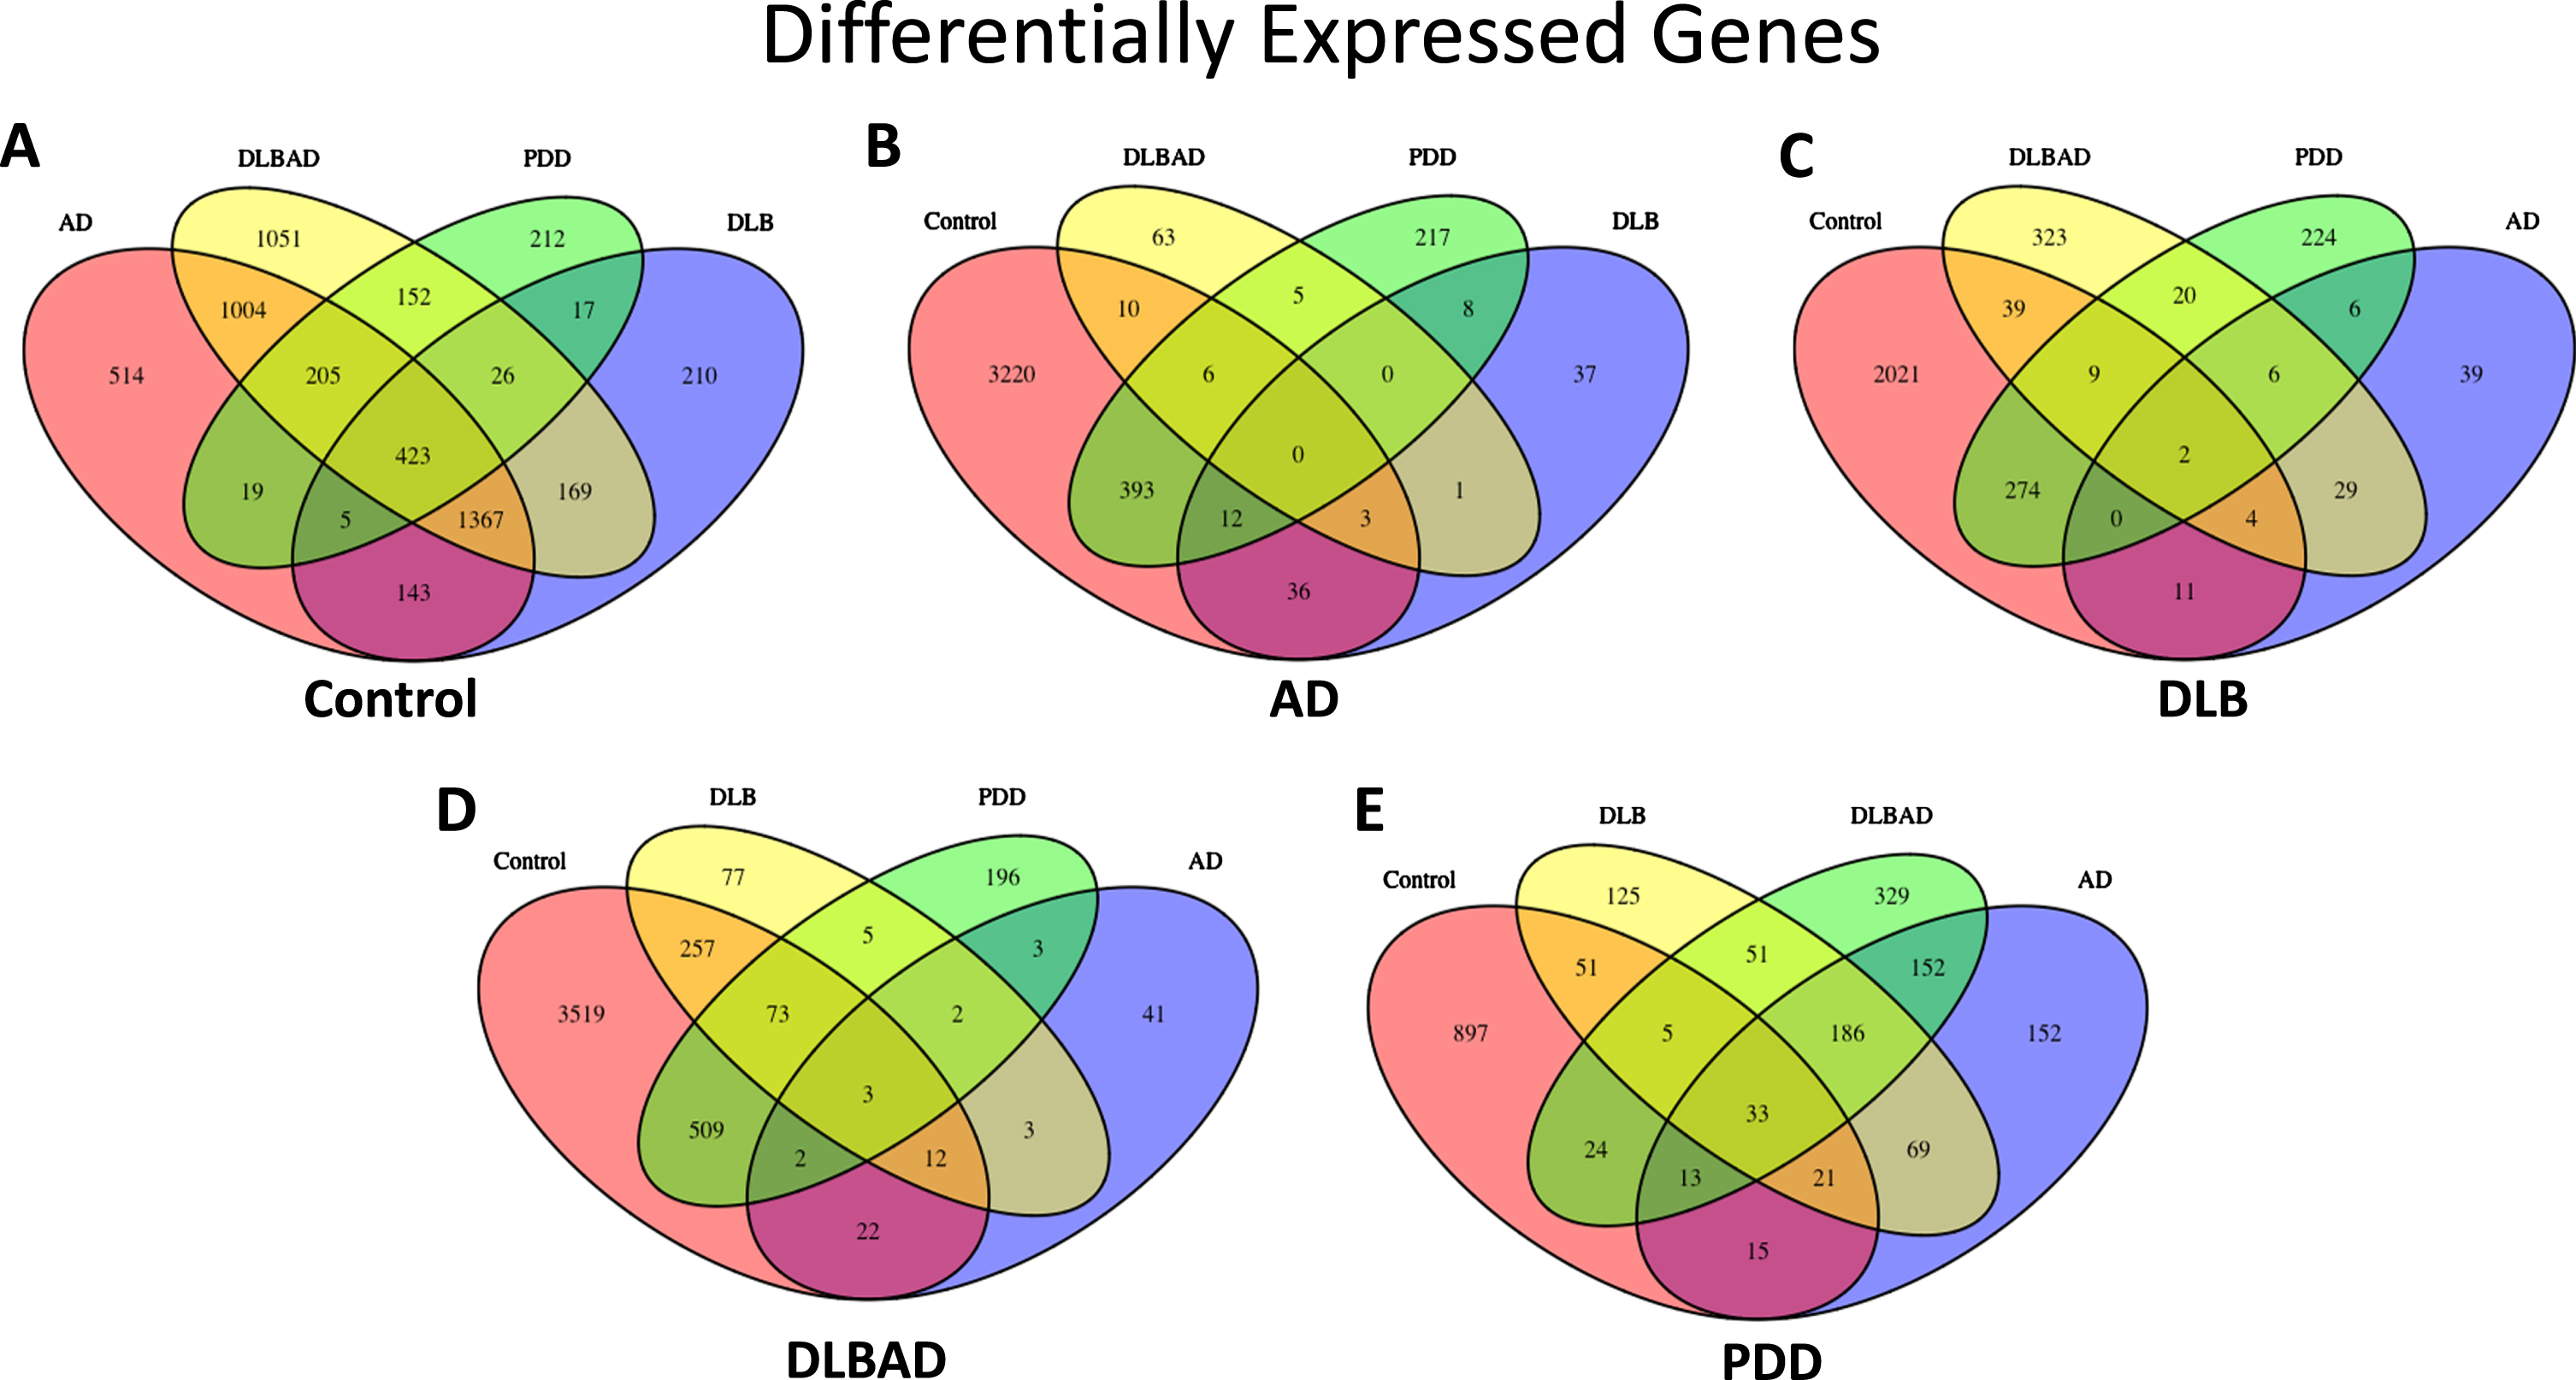 Differentially expressed genes (DEGs). A) Total DEGs when comparing Control to all dementia types. B) Total DEGs when comparing AD to Control and all dementia types. C) Total DEGs when comparing DLB to Control and all dementia types. D) Total DEGs when comparing DLBAD to Control and all dementia types. E) Total DEGs when comparing PDD to Control and all dementia types